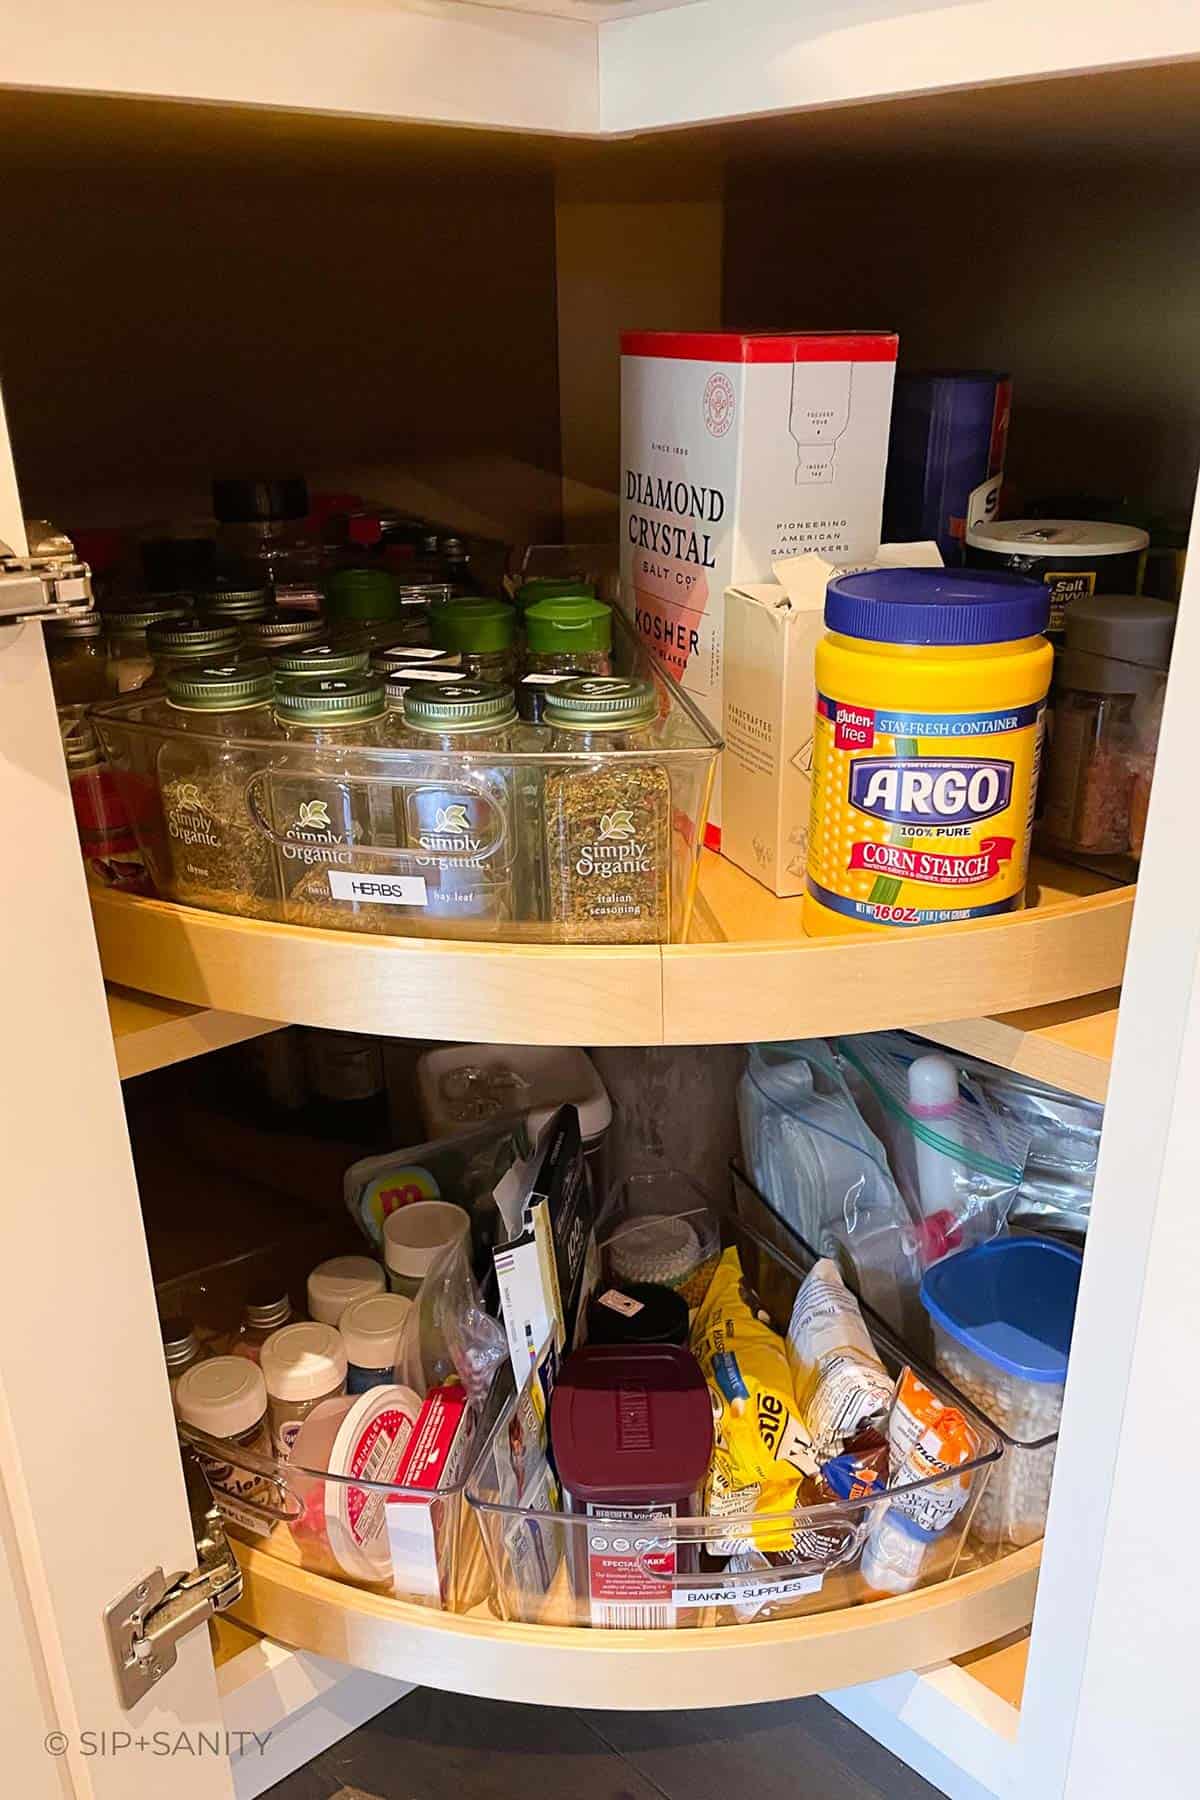 A lazy susan spice cabinet after being neatly reorganized.